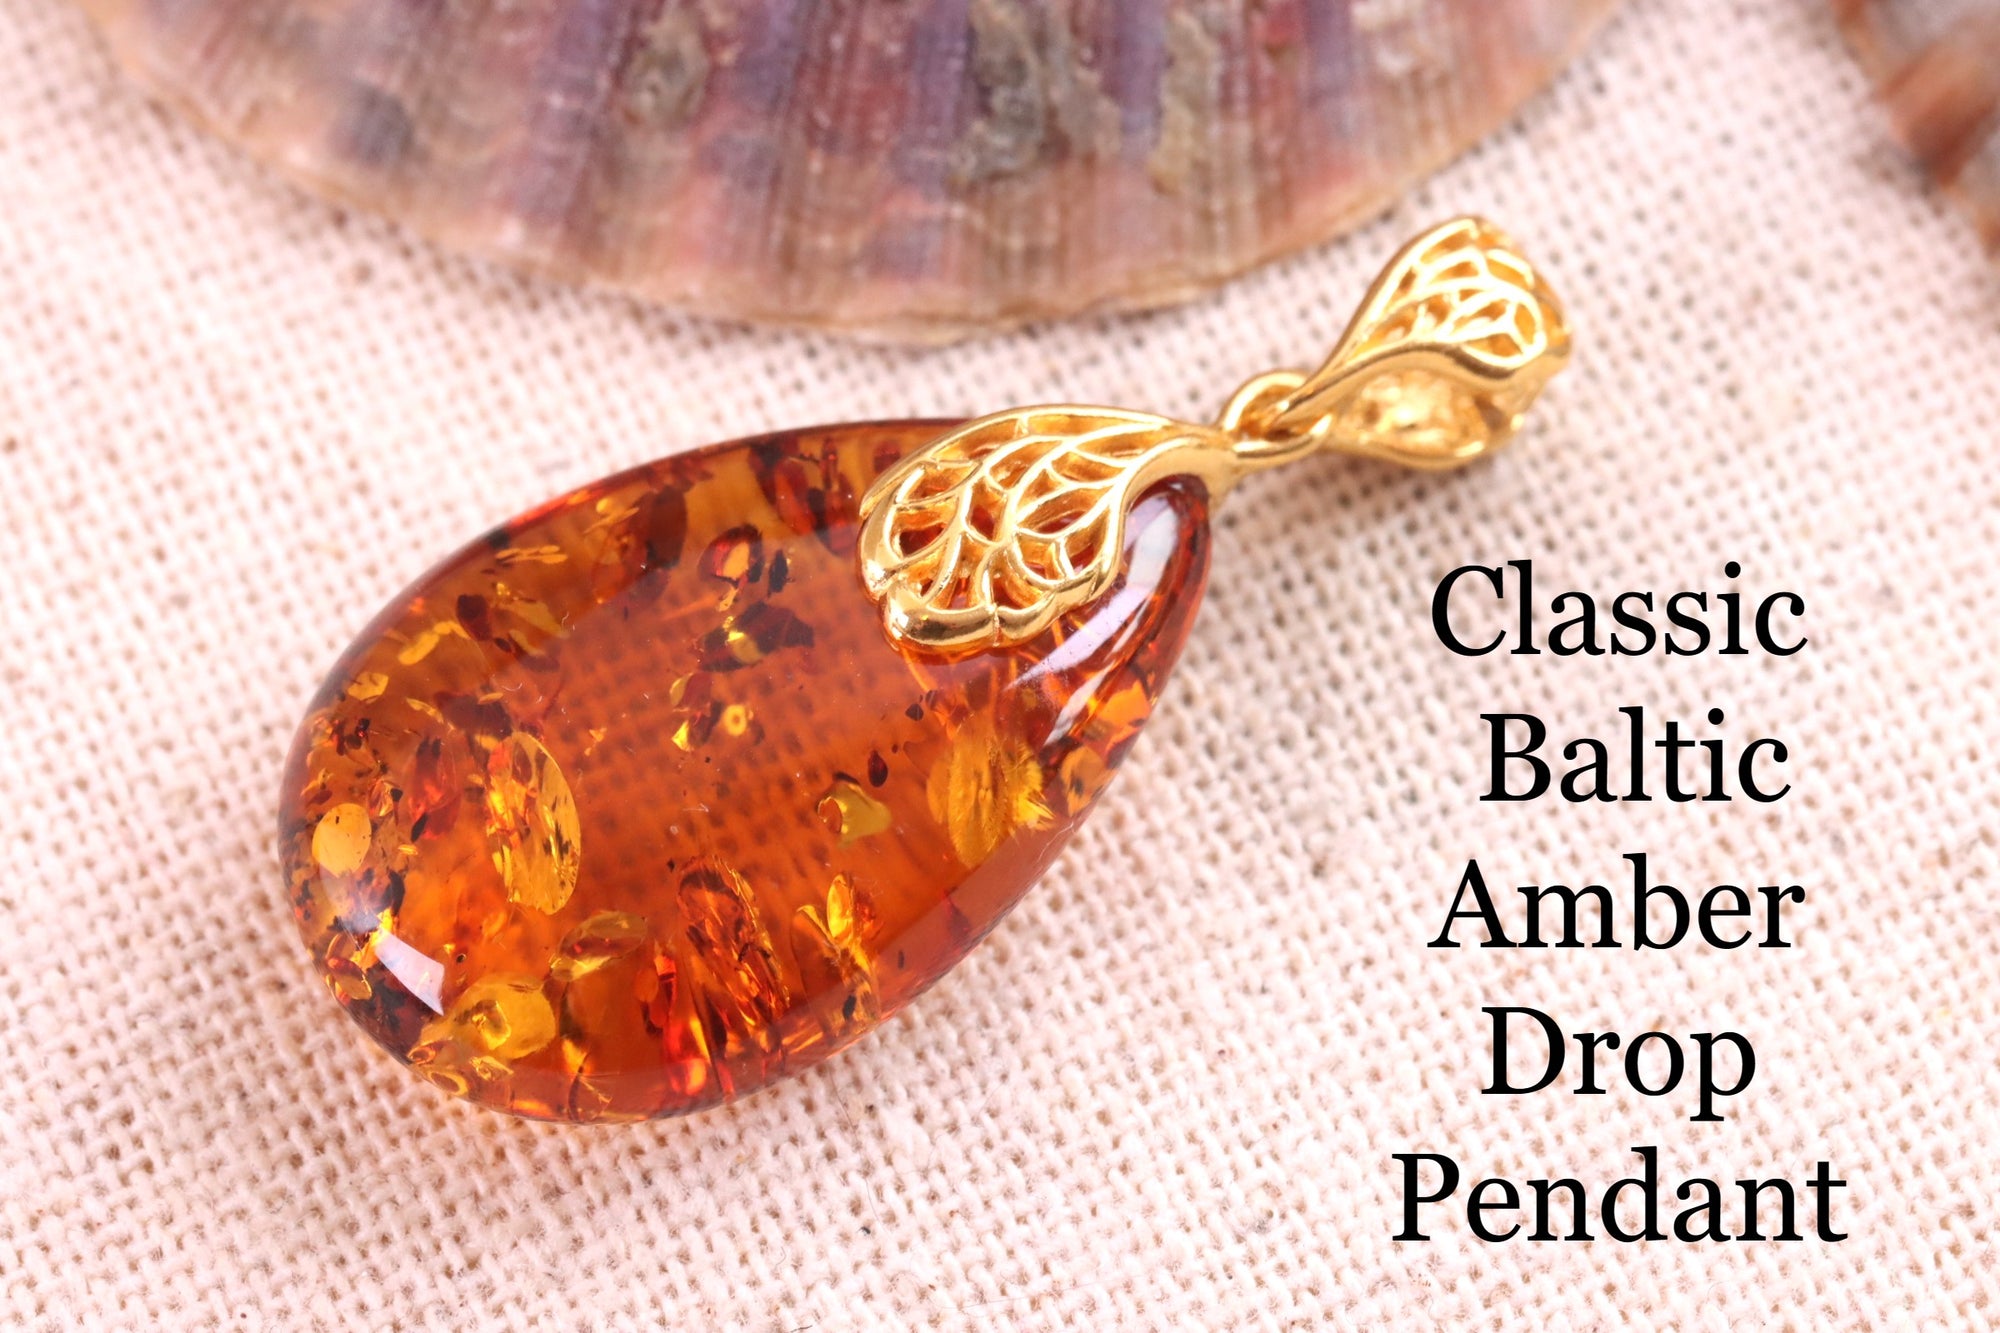 Special Offer 925 Gold Plated Silver Amber Gemstone Pendant Only One Available